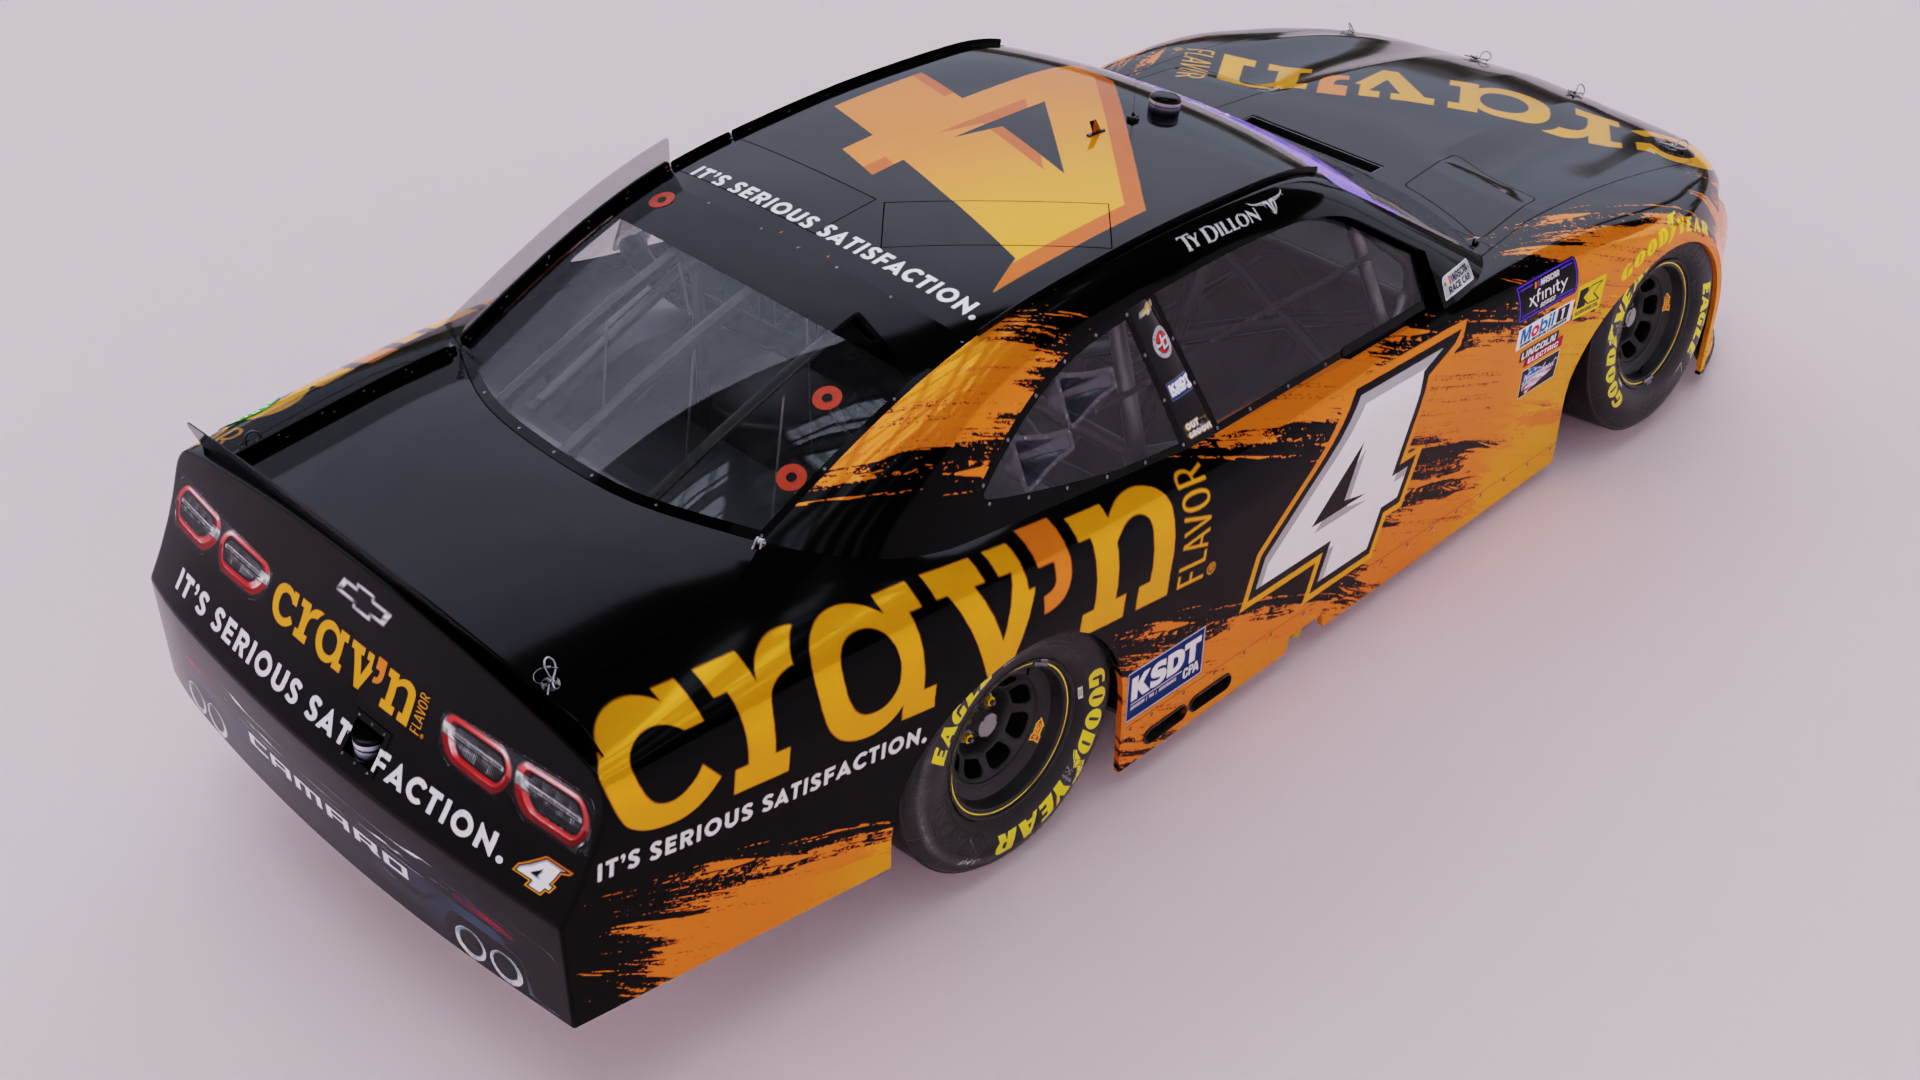 Pictured is a rendering of the No. 4 Crav'n Flavor Chevrolet that veteran driver Ty Dillon will drive in The Loop 110 Chicago Street Race on Saturday, July 6.